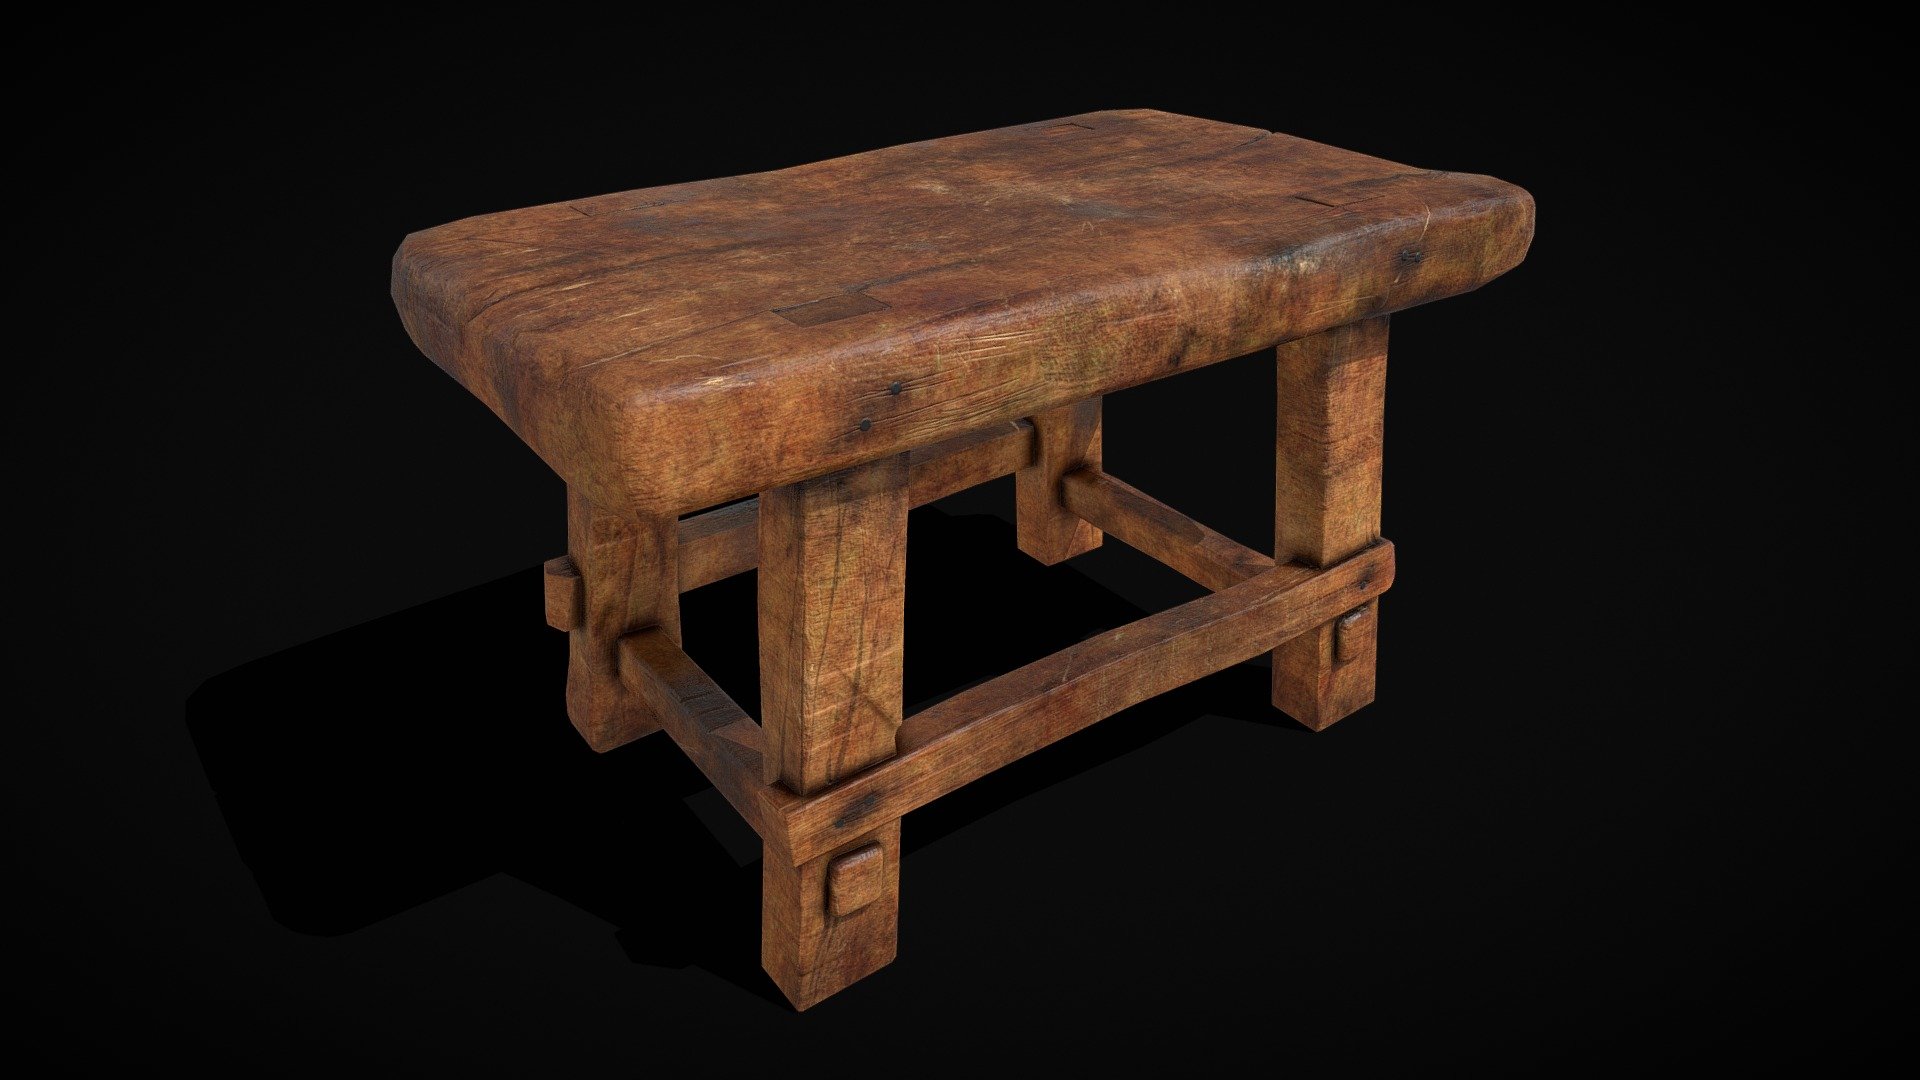 Rustic_Varnished_Cracked_Stool_FBX

VR / AR / Low-poly
PBR approved
Geometry Polygon mesh
Polygons 3,150
Vertices 3,007
Textures 4K PNG - Rustic Varnished Cracked Stool - Buy Royalty Free 3D model by GetDeadEntertainment 3d model